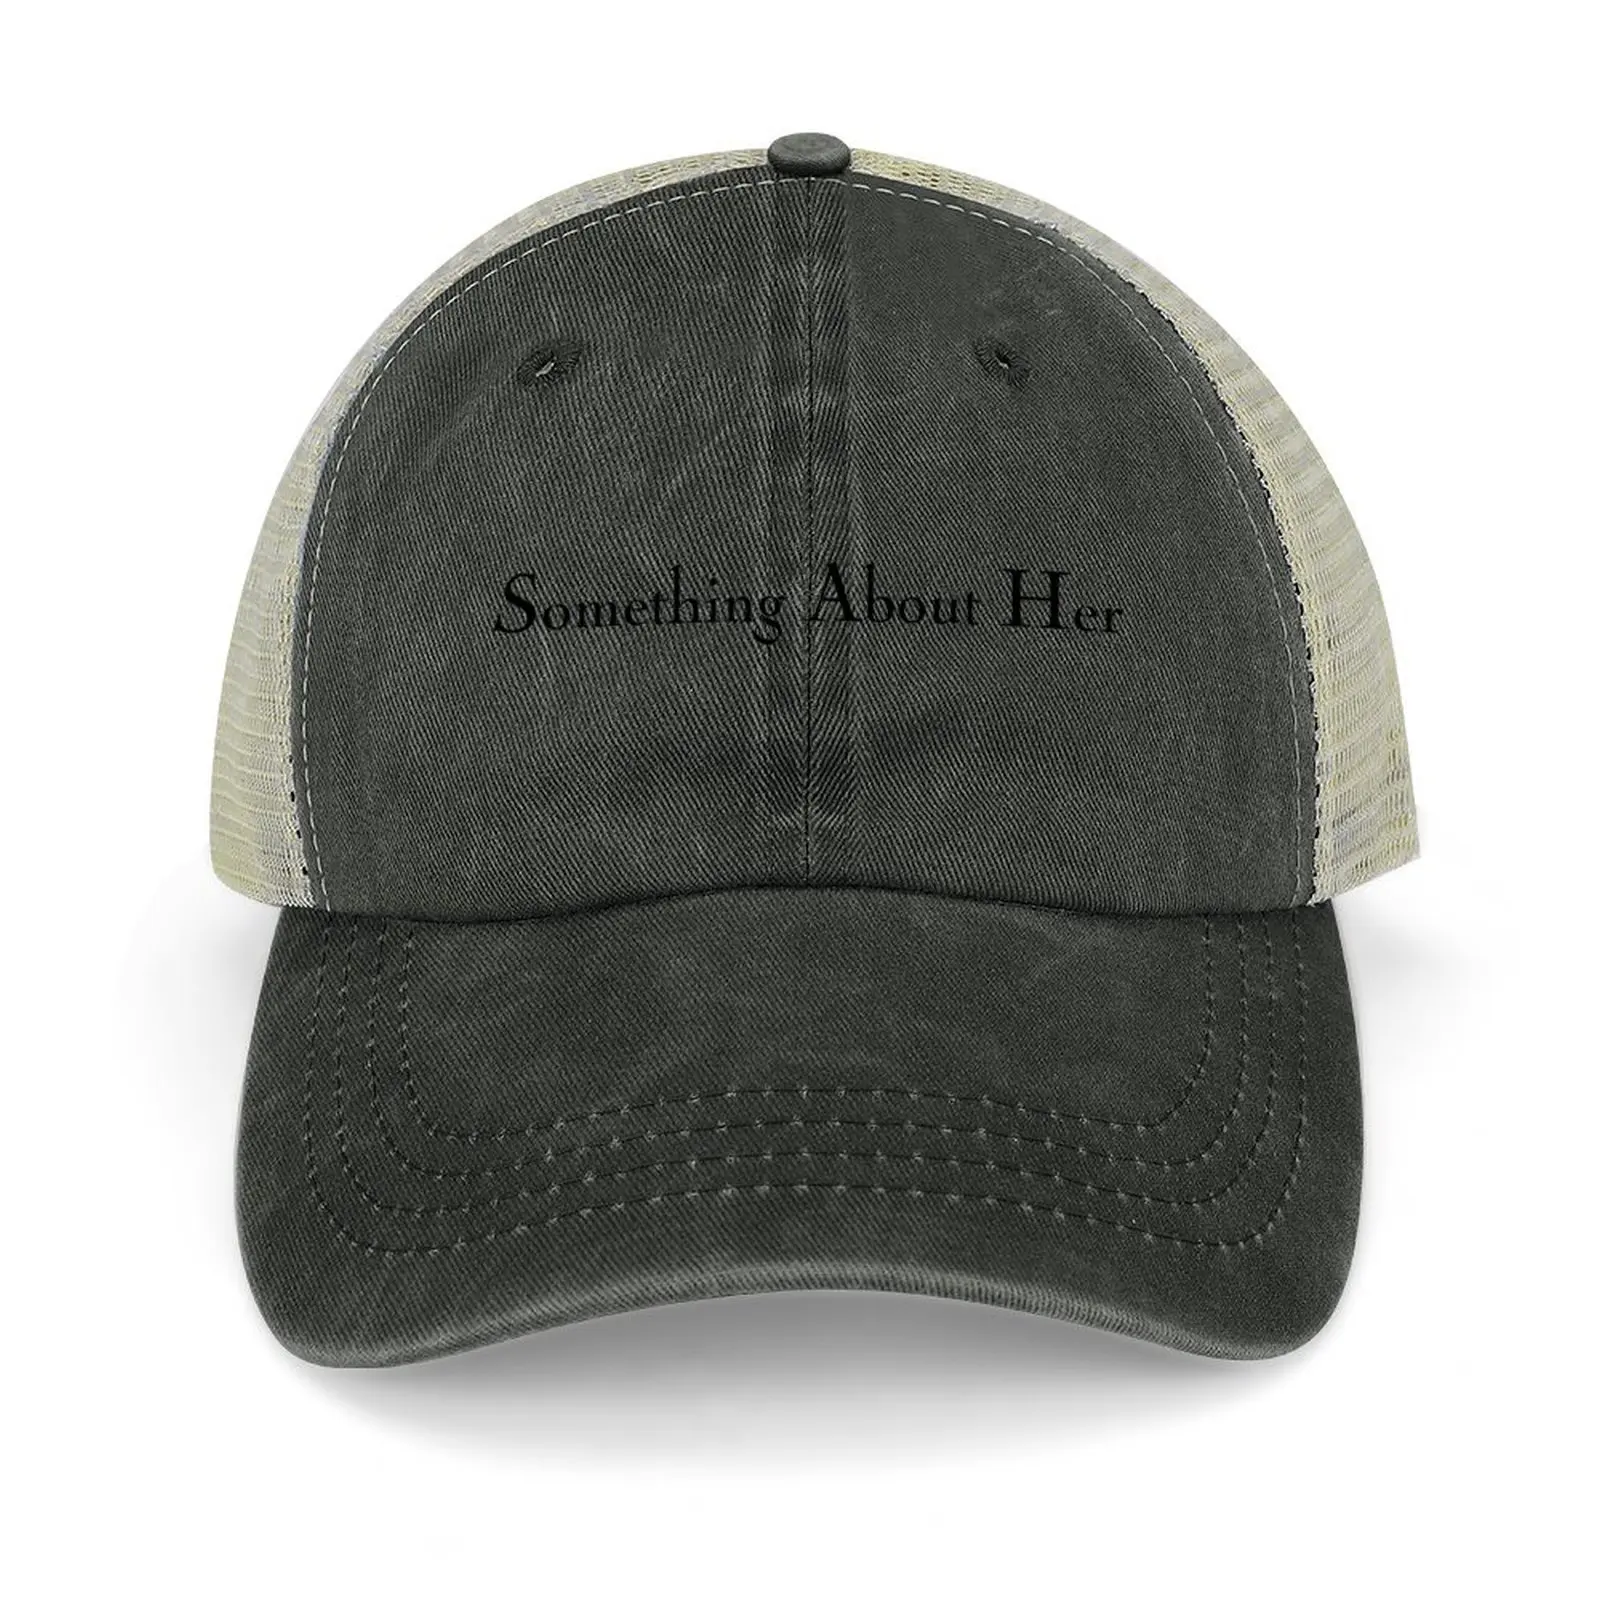 

Something About Her Merch Something About Her Logo Cowboy Hat Luxury Brand Vintage Woman Hats Men's